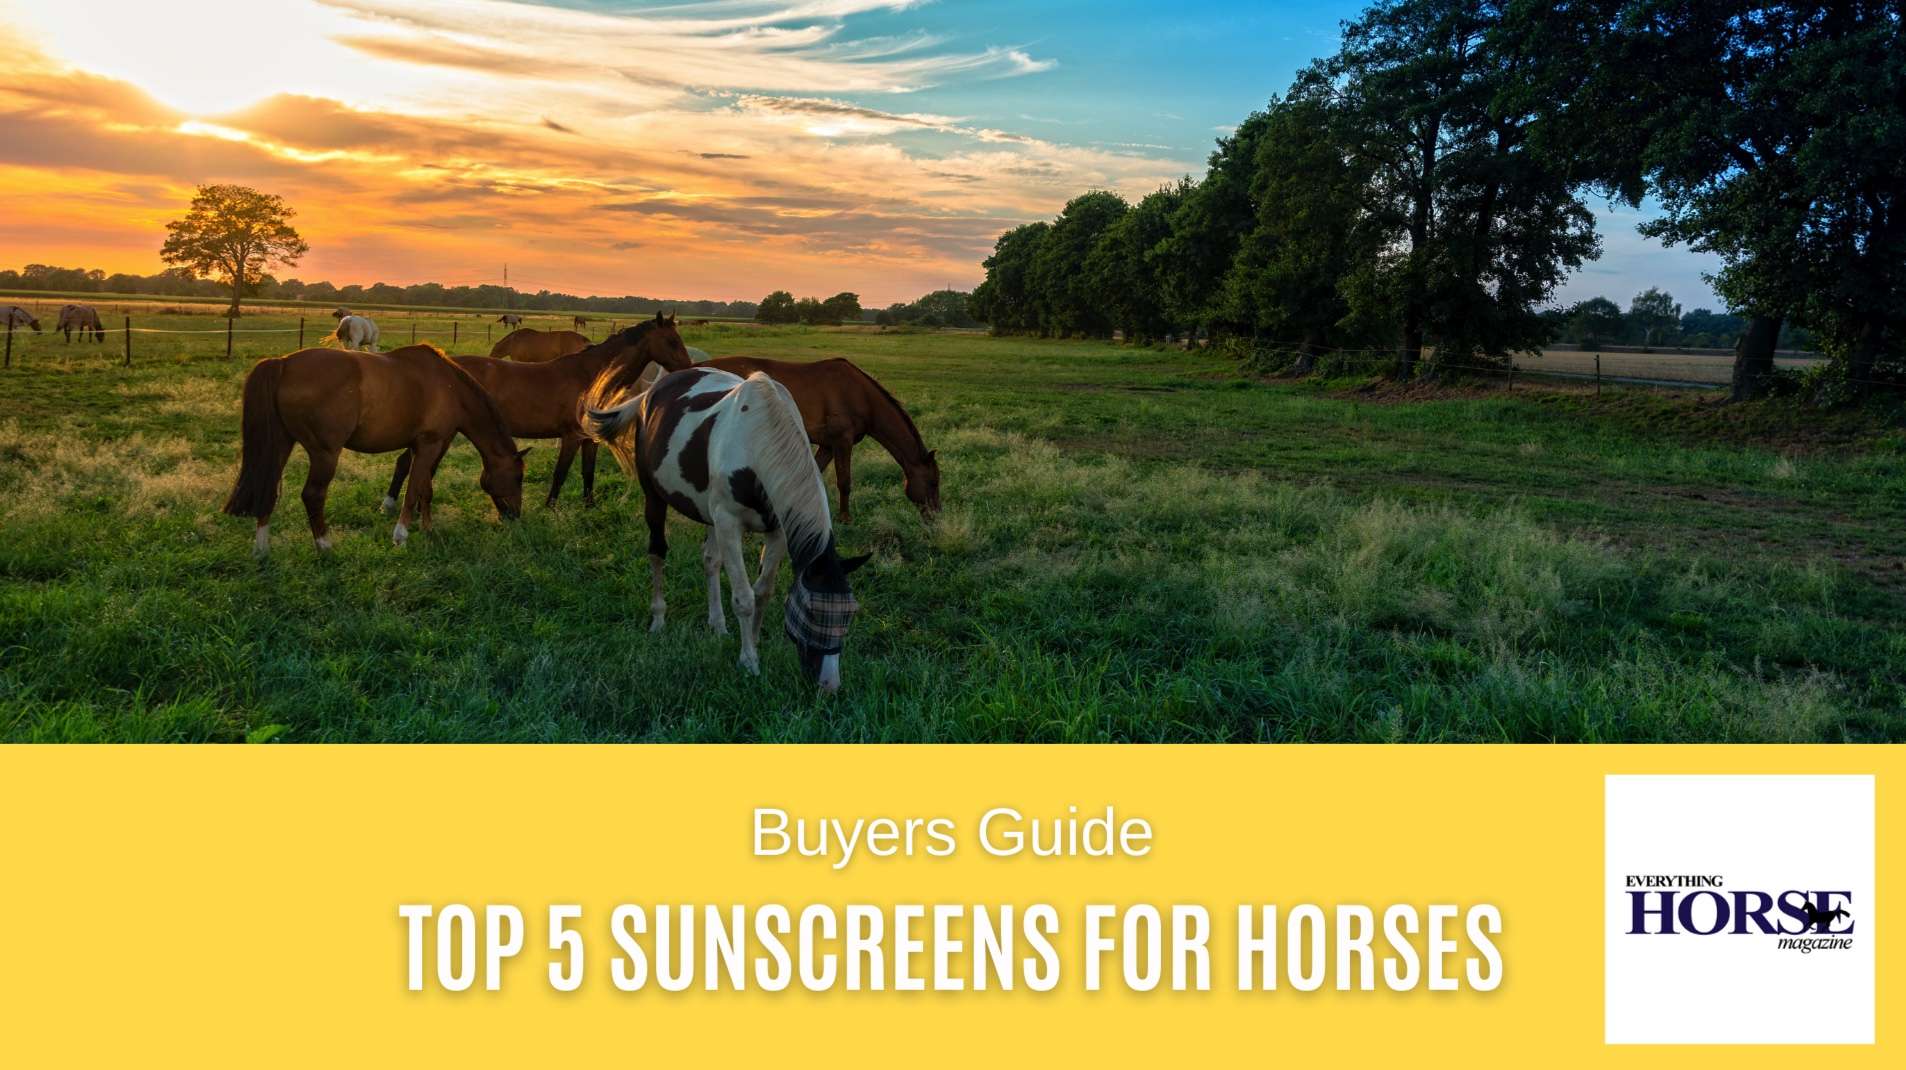 Top 5 Sunscreens For Horses